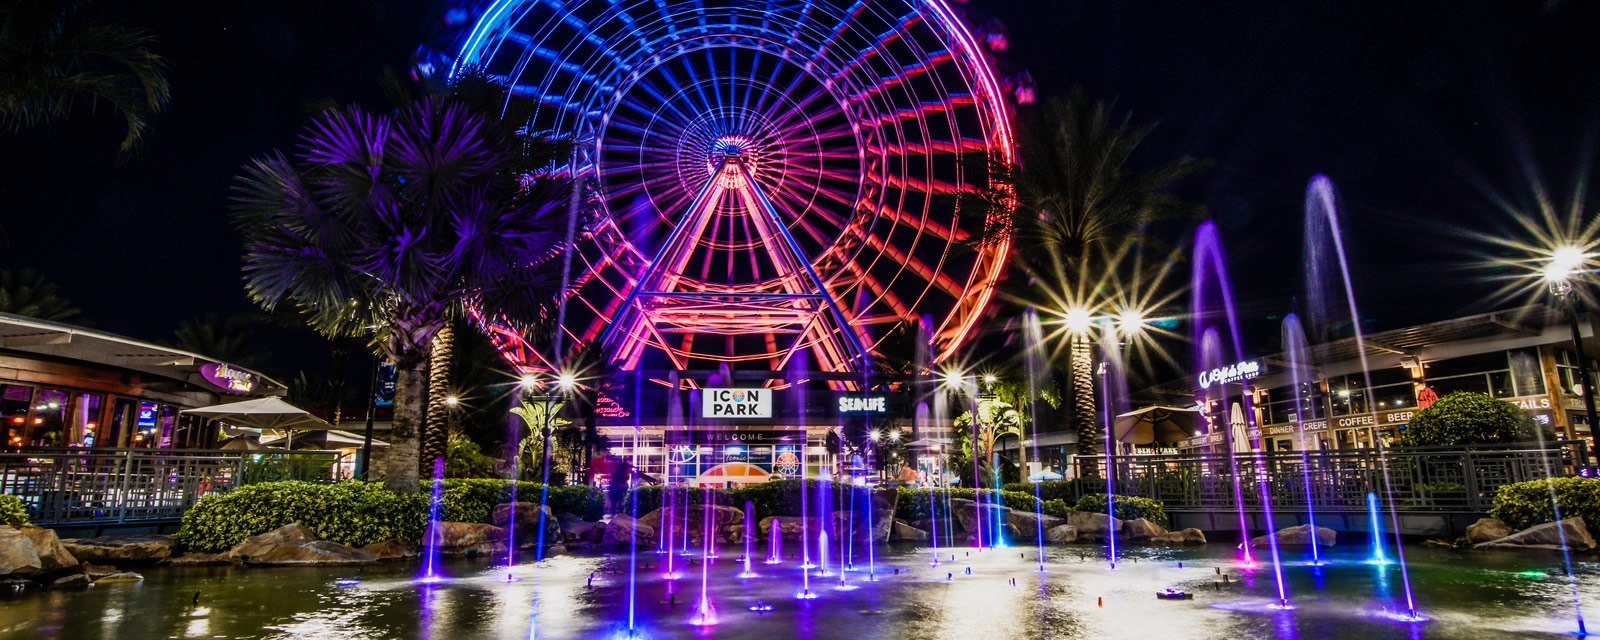 Orlando Theme Parks & Attractions